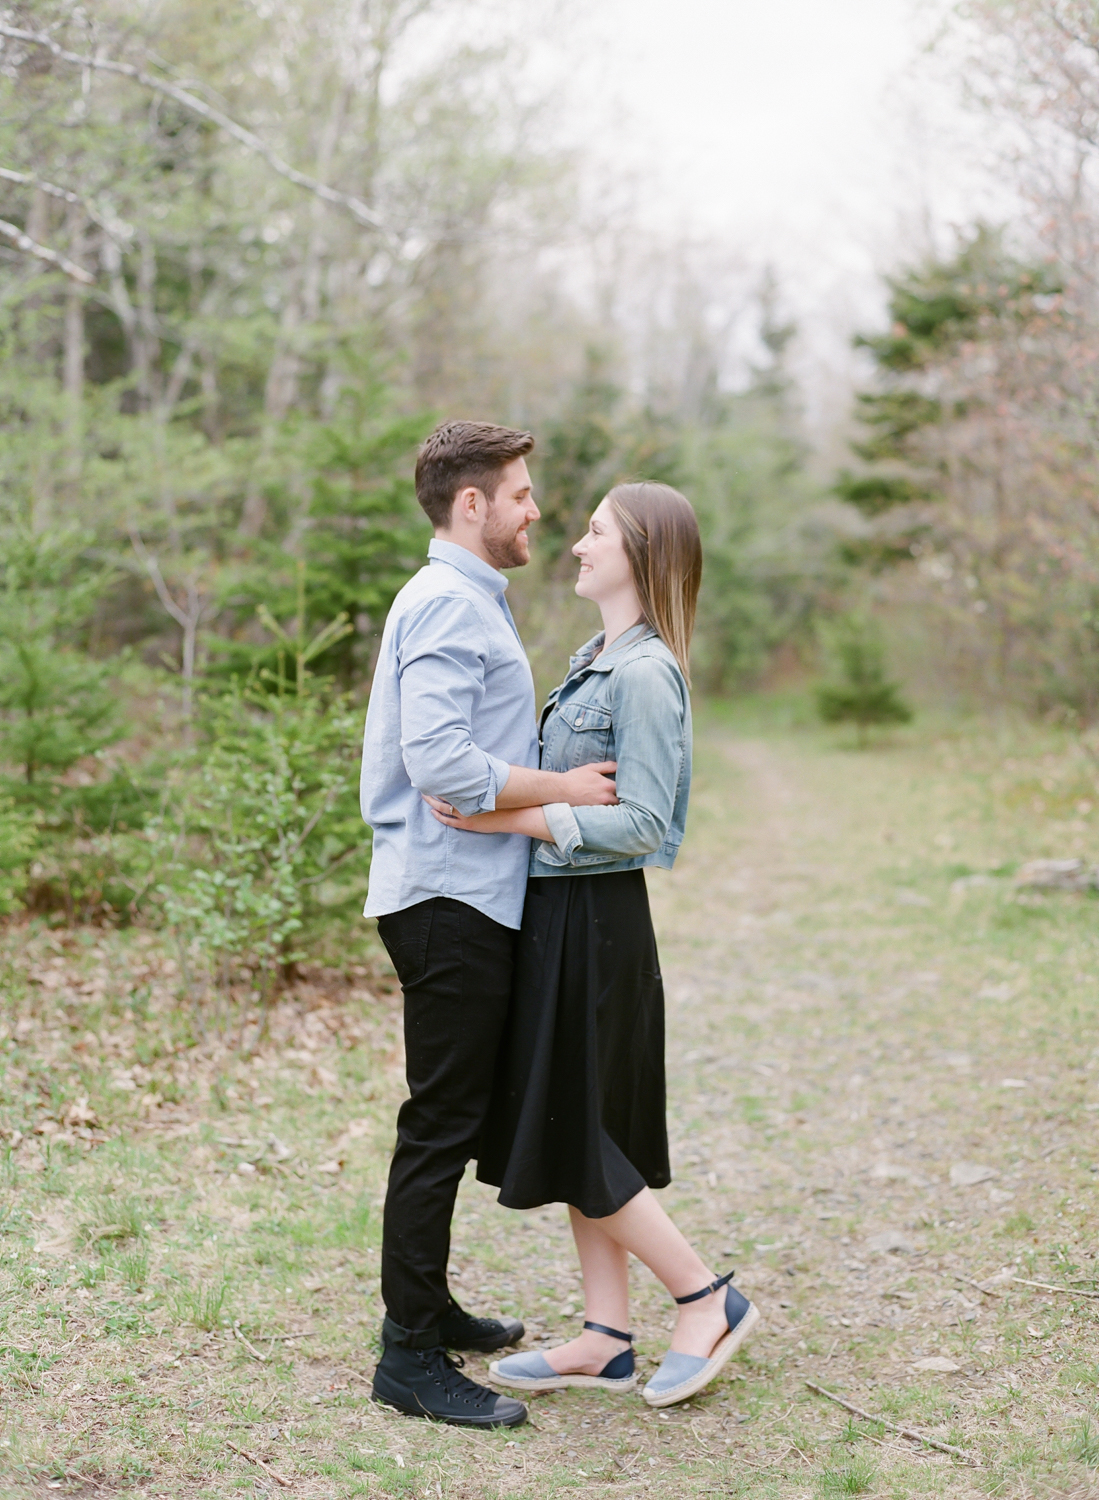 Halifax Engagement Session, Young Couple, In Forest, Captured by Jacqueline Anne Photography, Halifax Wedding Photographer, based in Nova Scotia.